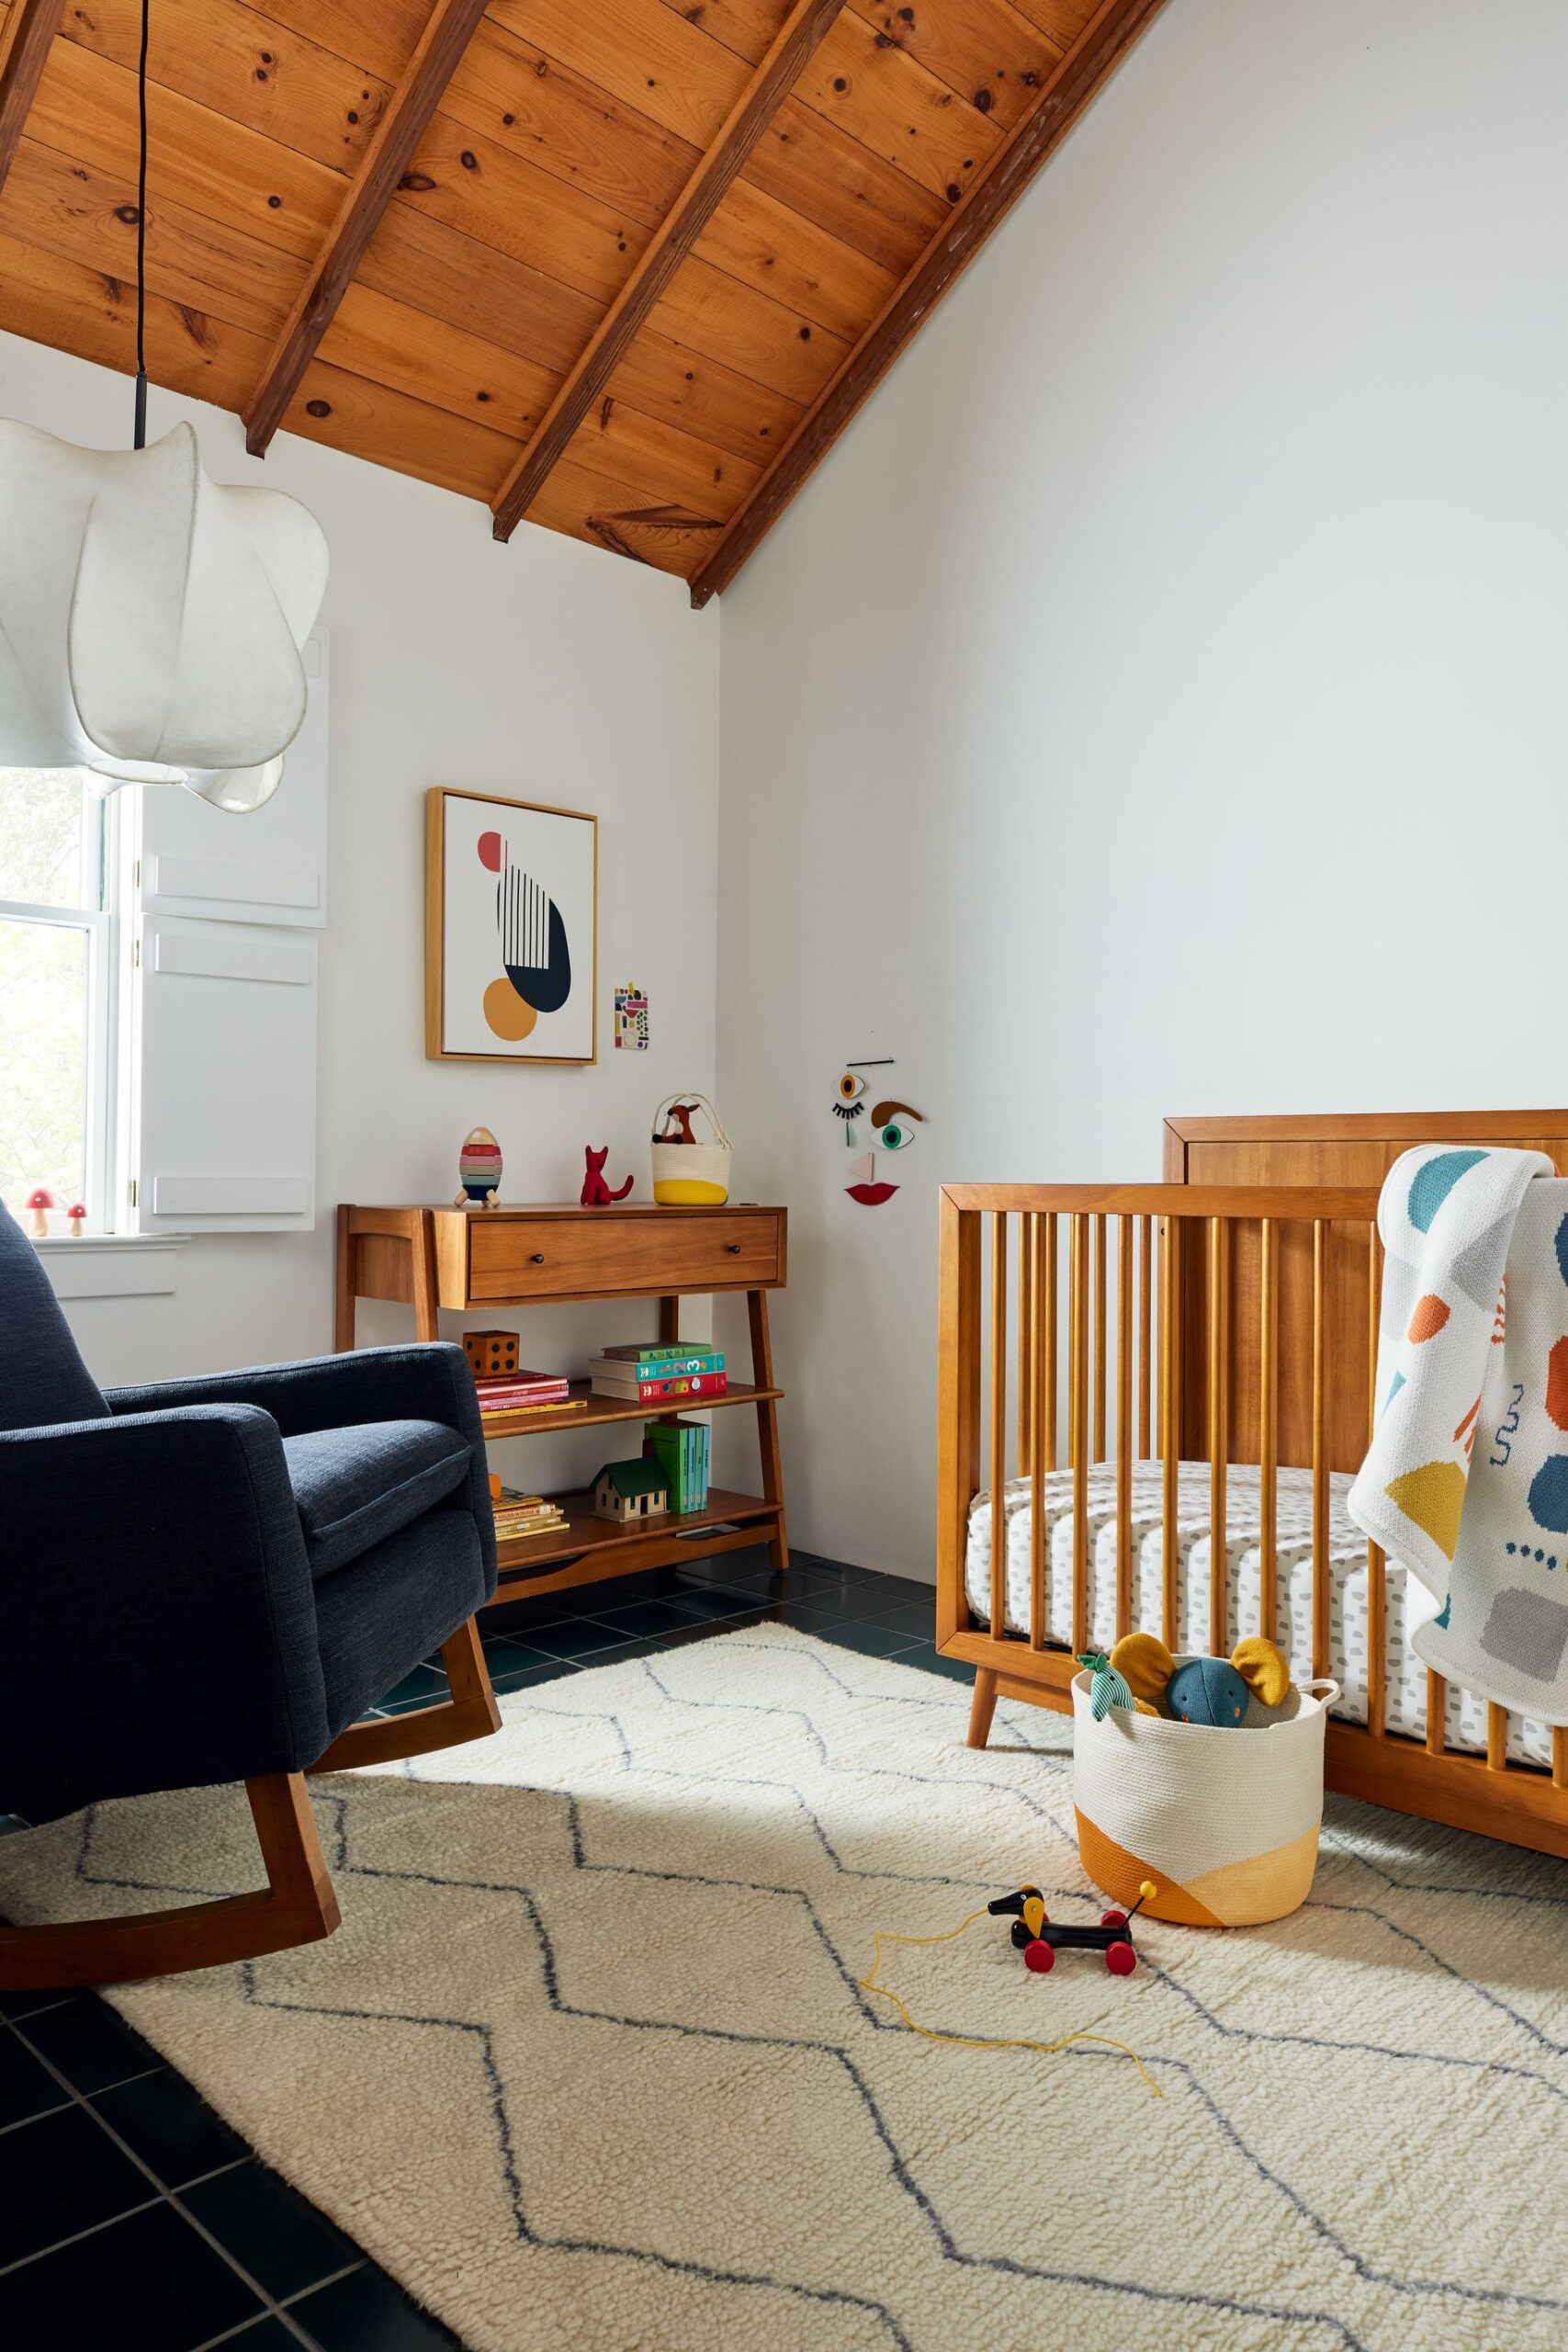 The importance of kid rugs and furniture